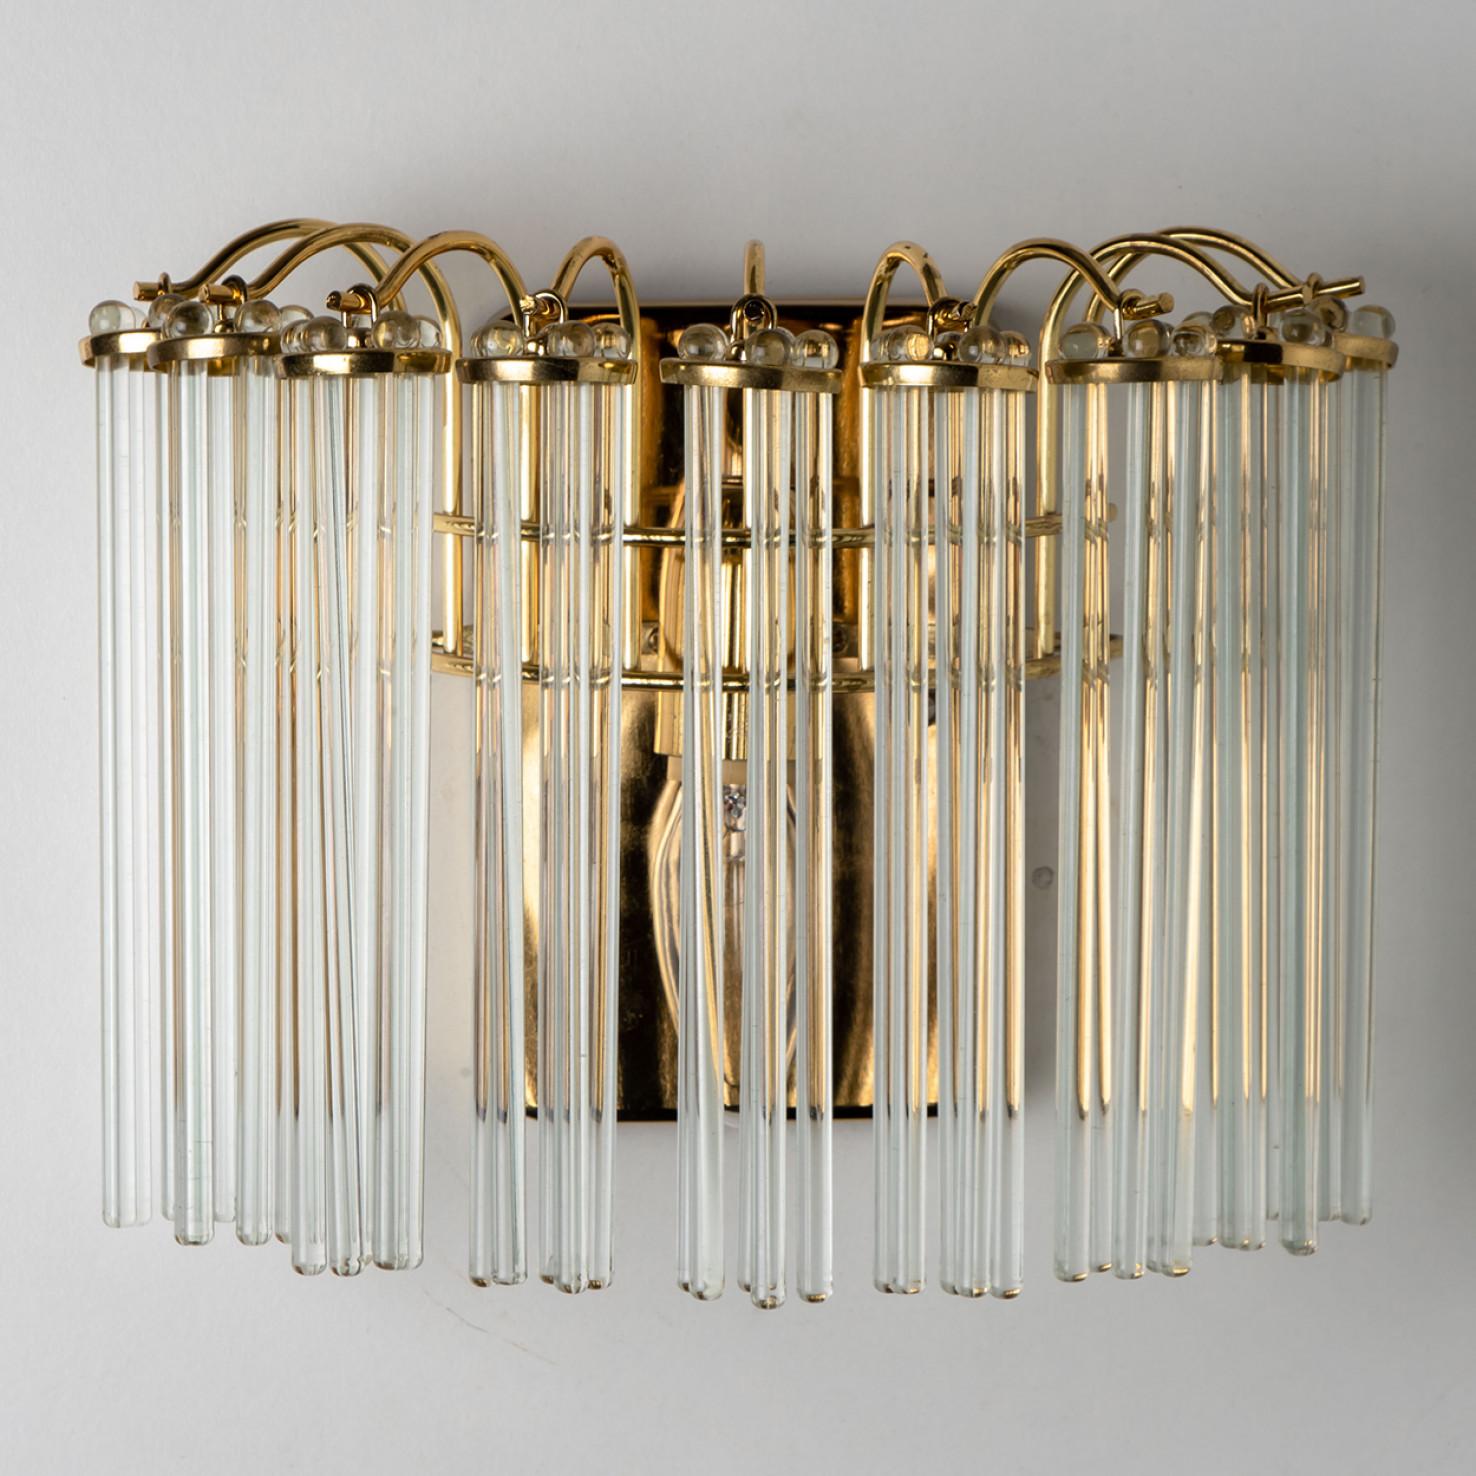 Pair of Wonderful high-end wall sconces in the style of Sciolari. With long hanging glass 'tubes' and brass details giving this piece an elegant appearance which refracts the light, filling a room with a soft, warm glow.
The wall sconce has a brass